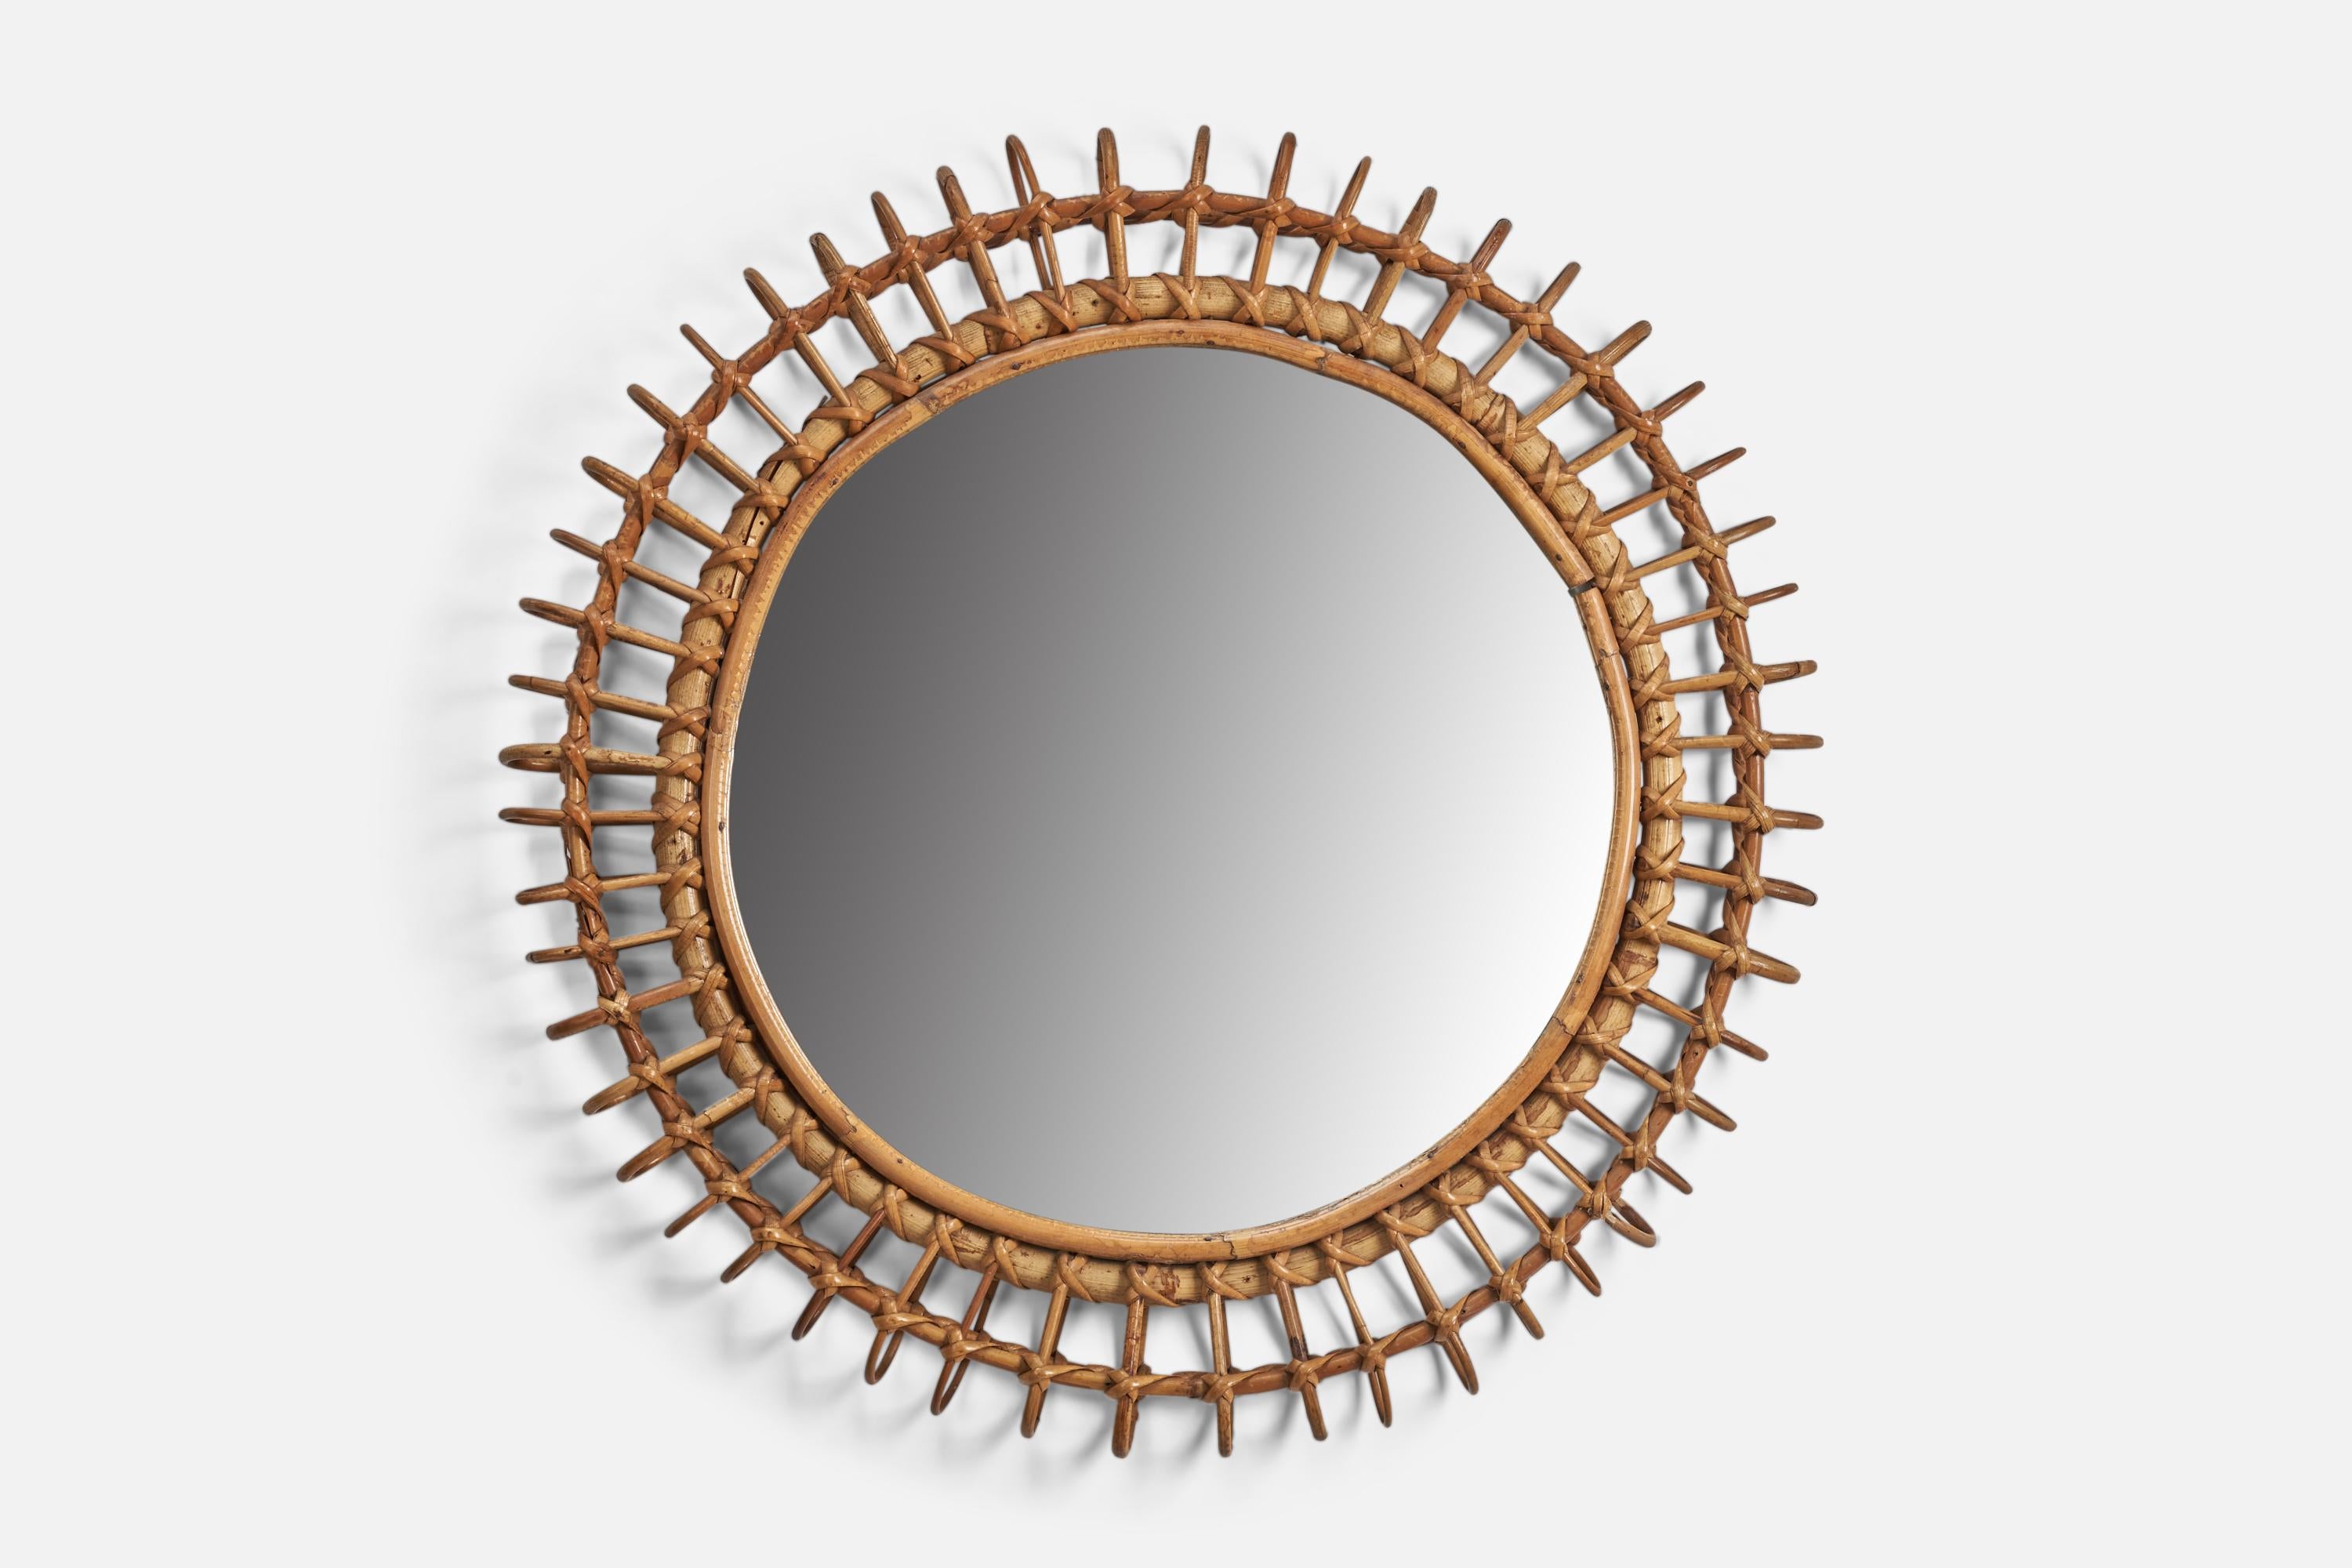 A rattan, glass wall mirror designed and produced by a Italian Designer, Italy, 1960s.